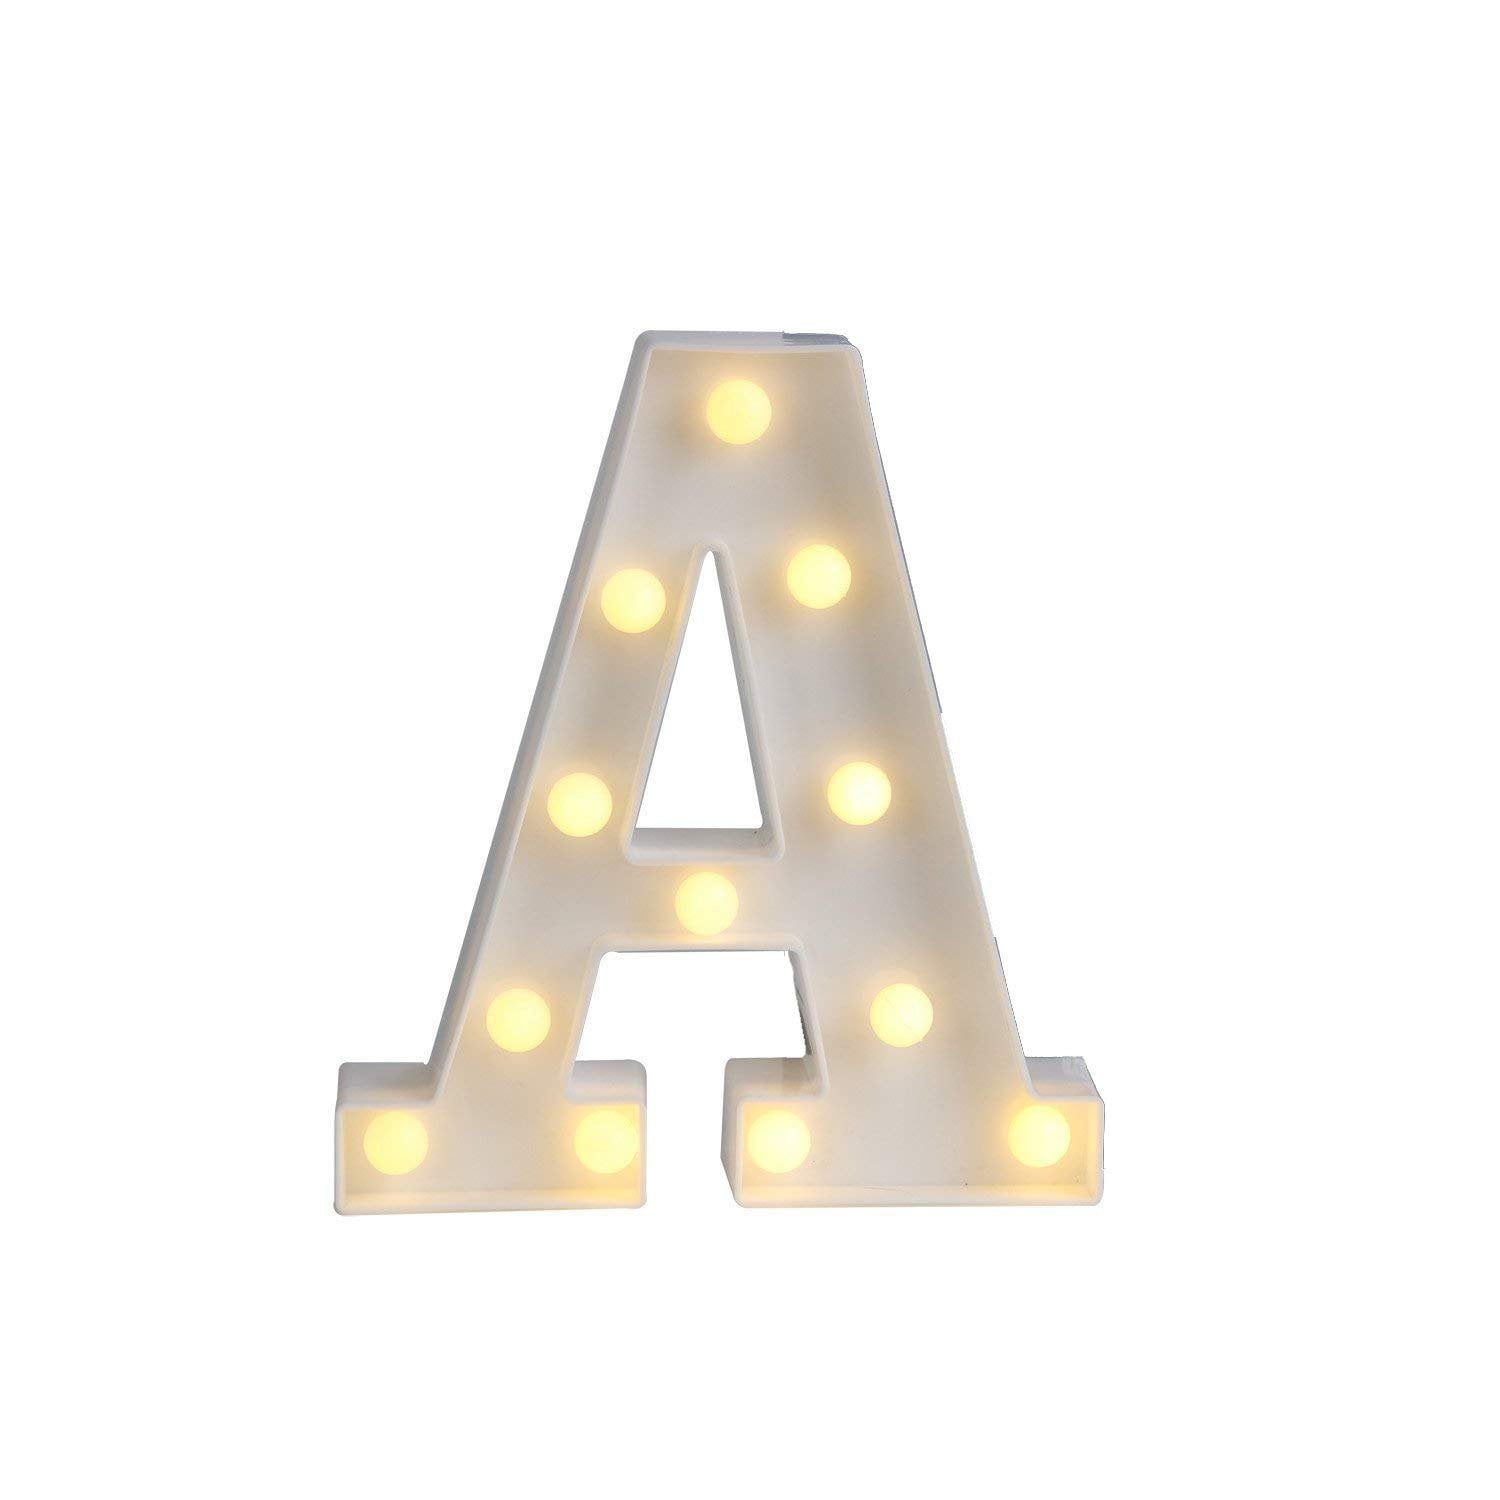 White PVC Freestanding Letters for Business Signage or Home Decor 